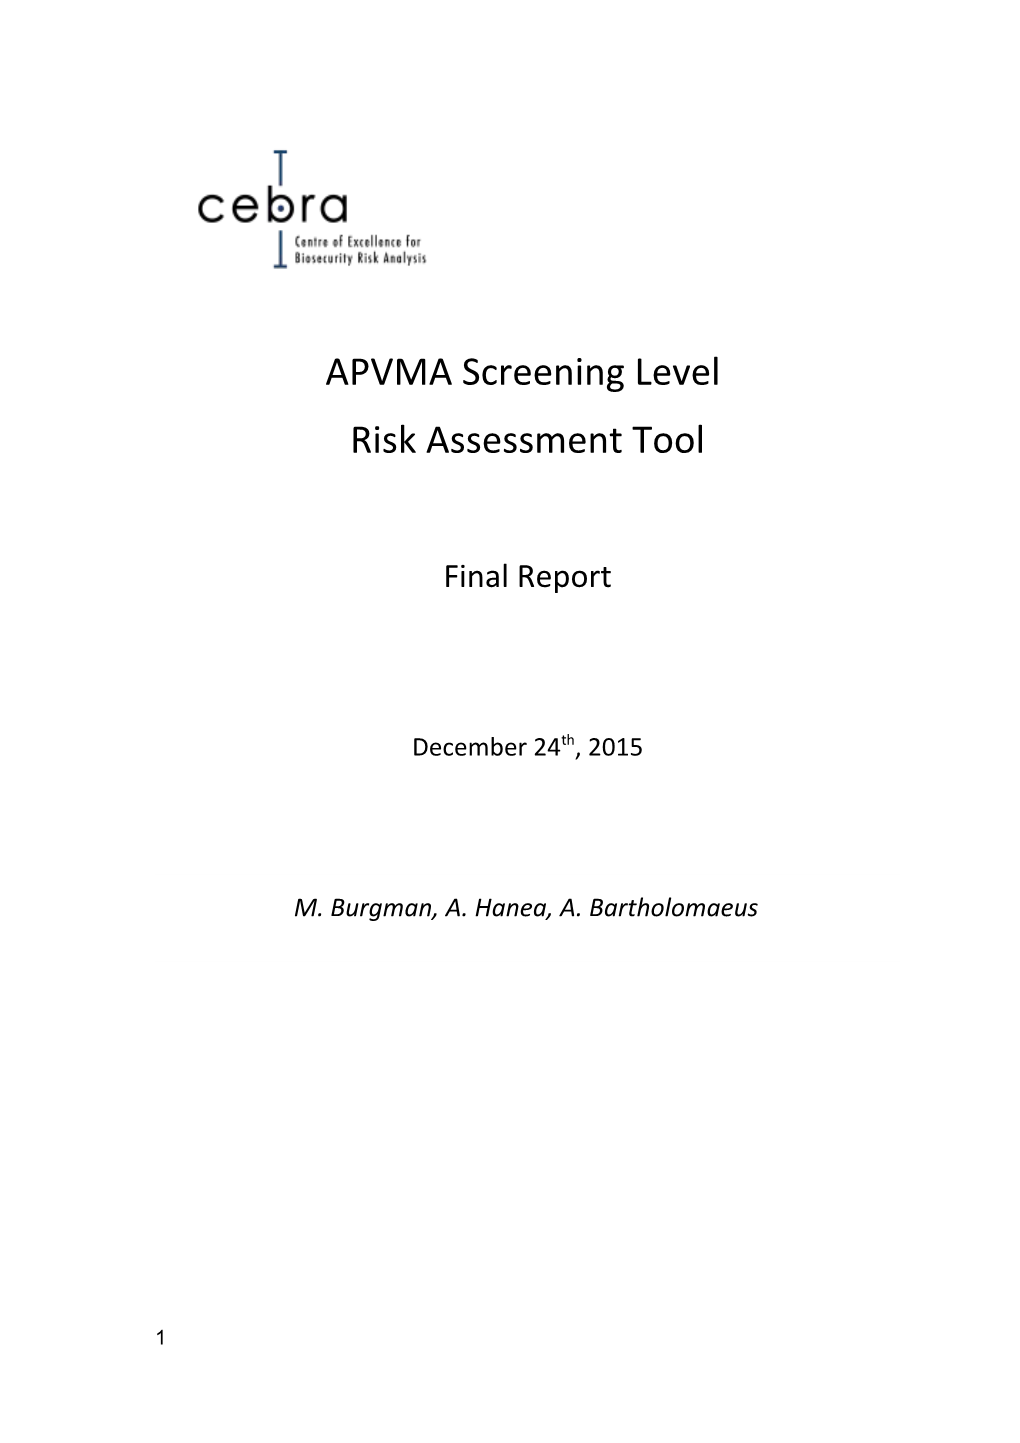 1.1Screening Level Risk Assessment Tool Project Background